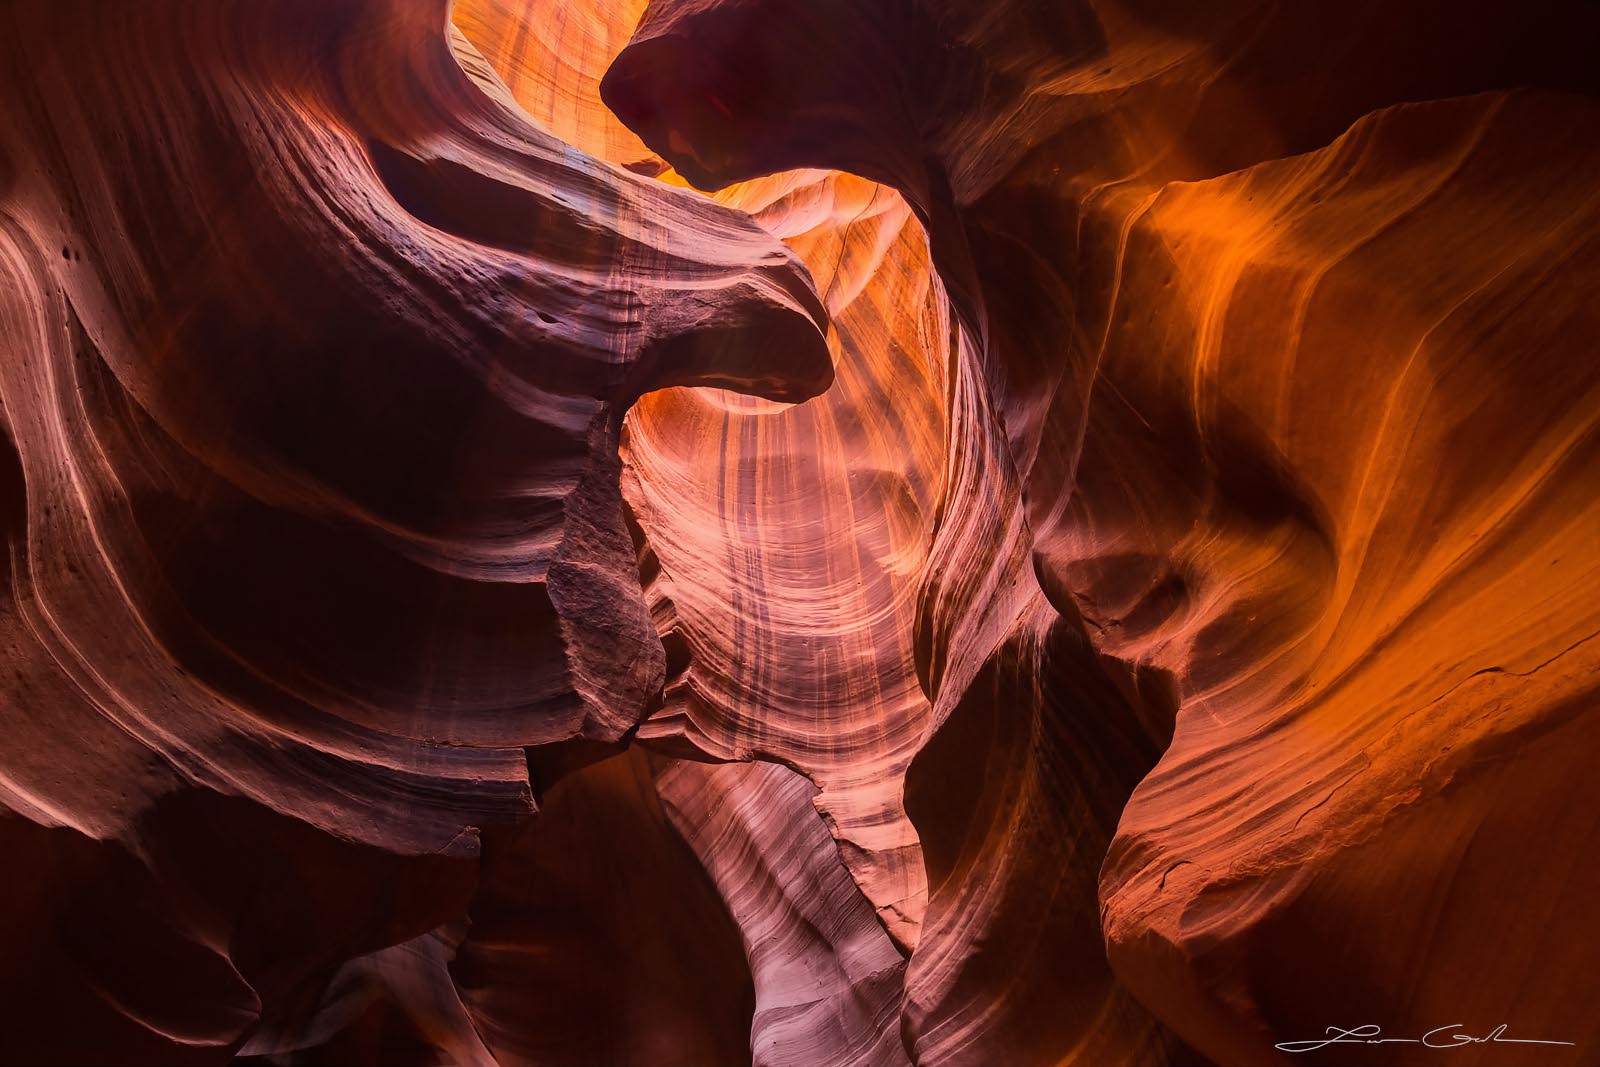 An abstract of naturally shaped heart looking sandstone with rich warm colors, Arizona